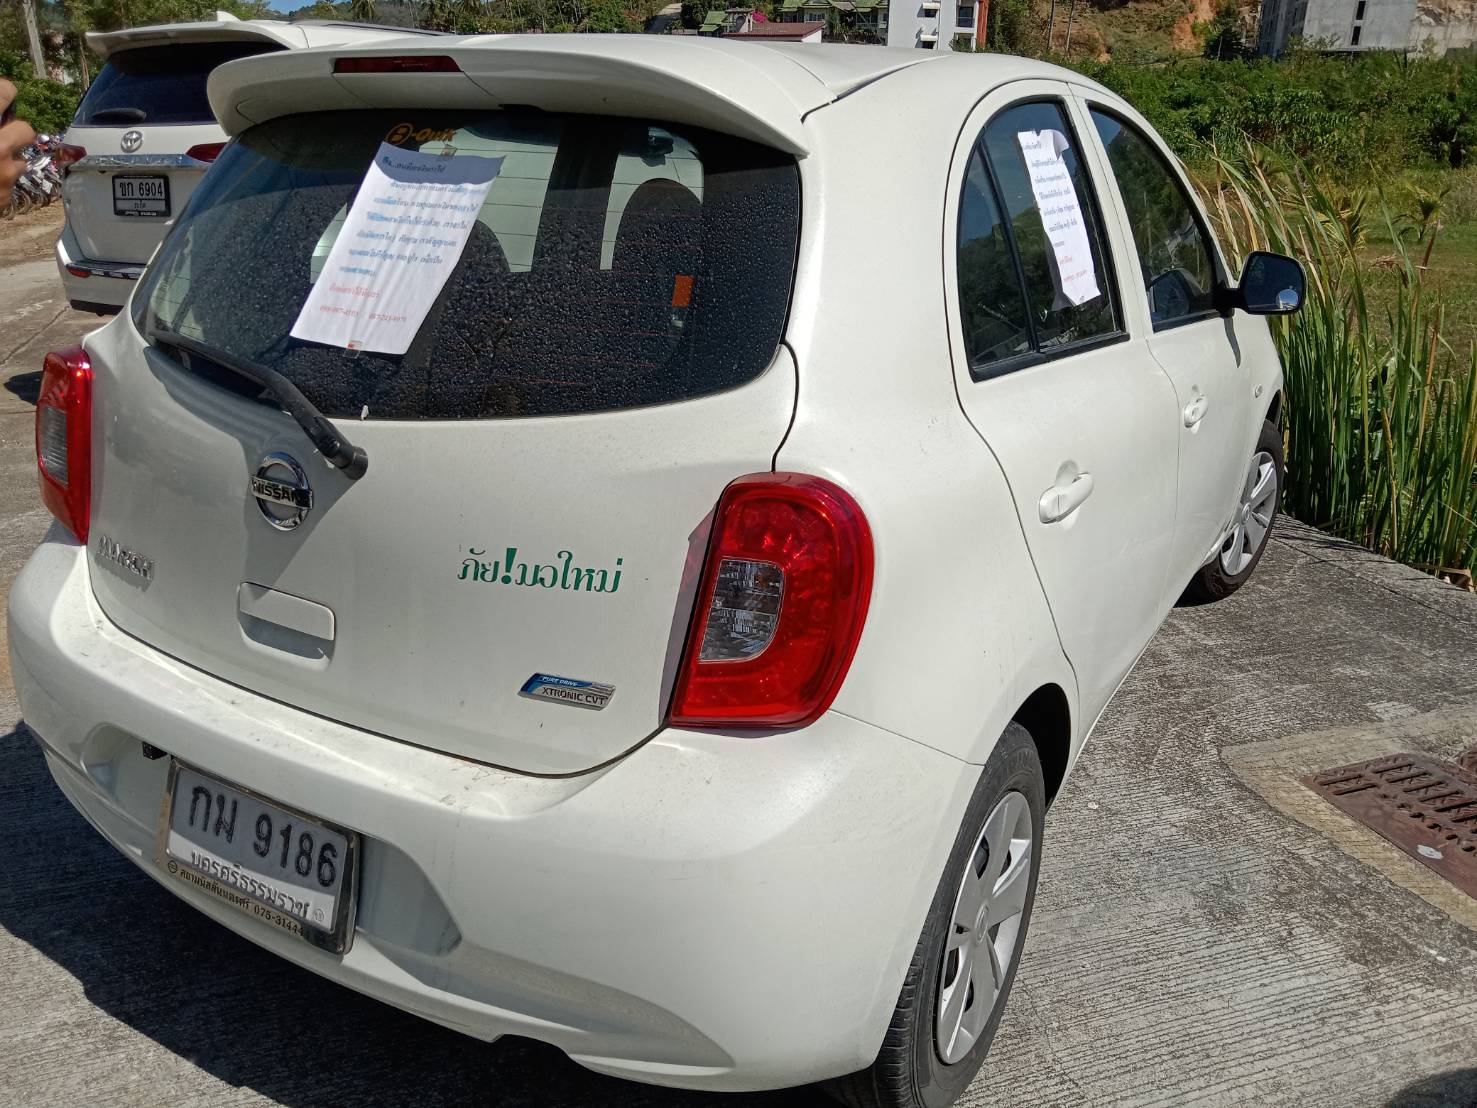 Alexandos's car, with a sign in Thai pledging the return of his cash put up on the windows.